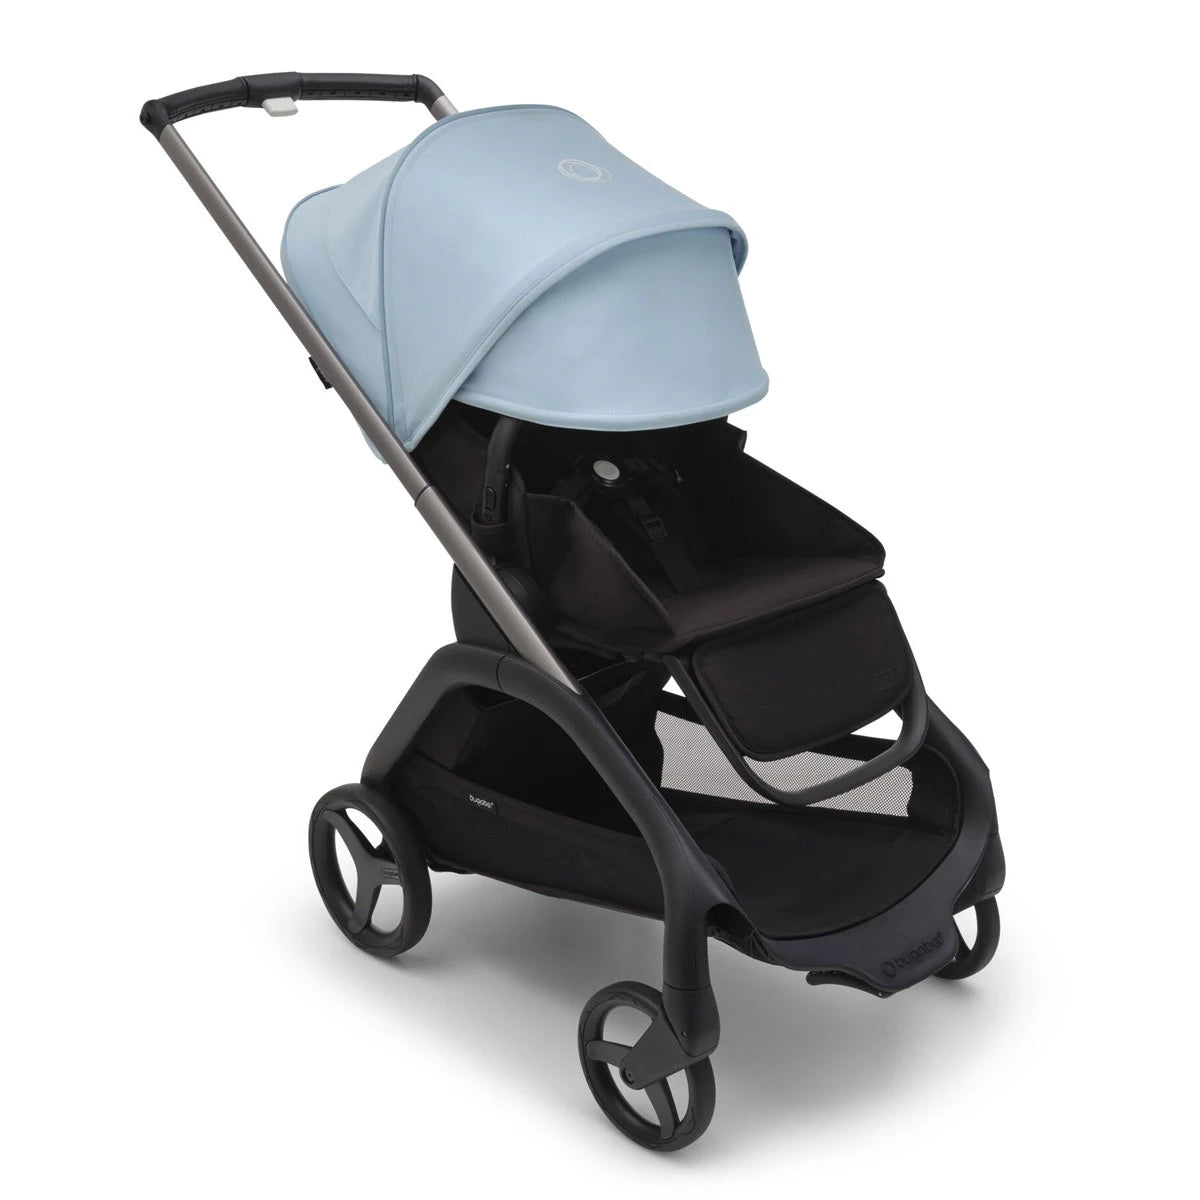  Bugaboo Dragonfly Complete Stroller 2